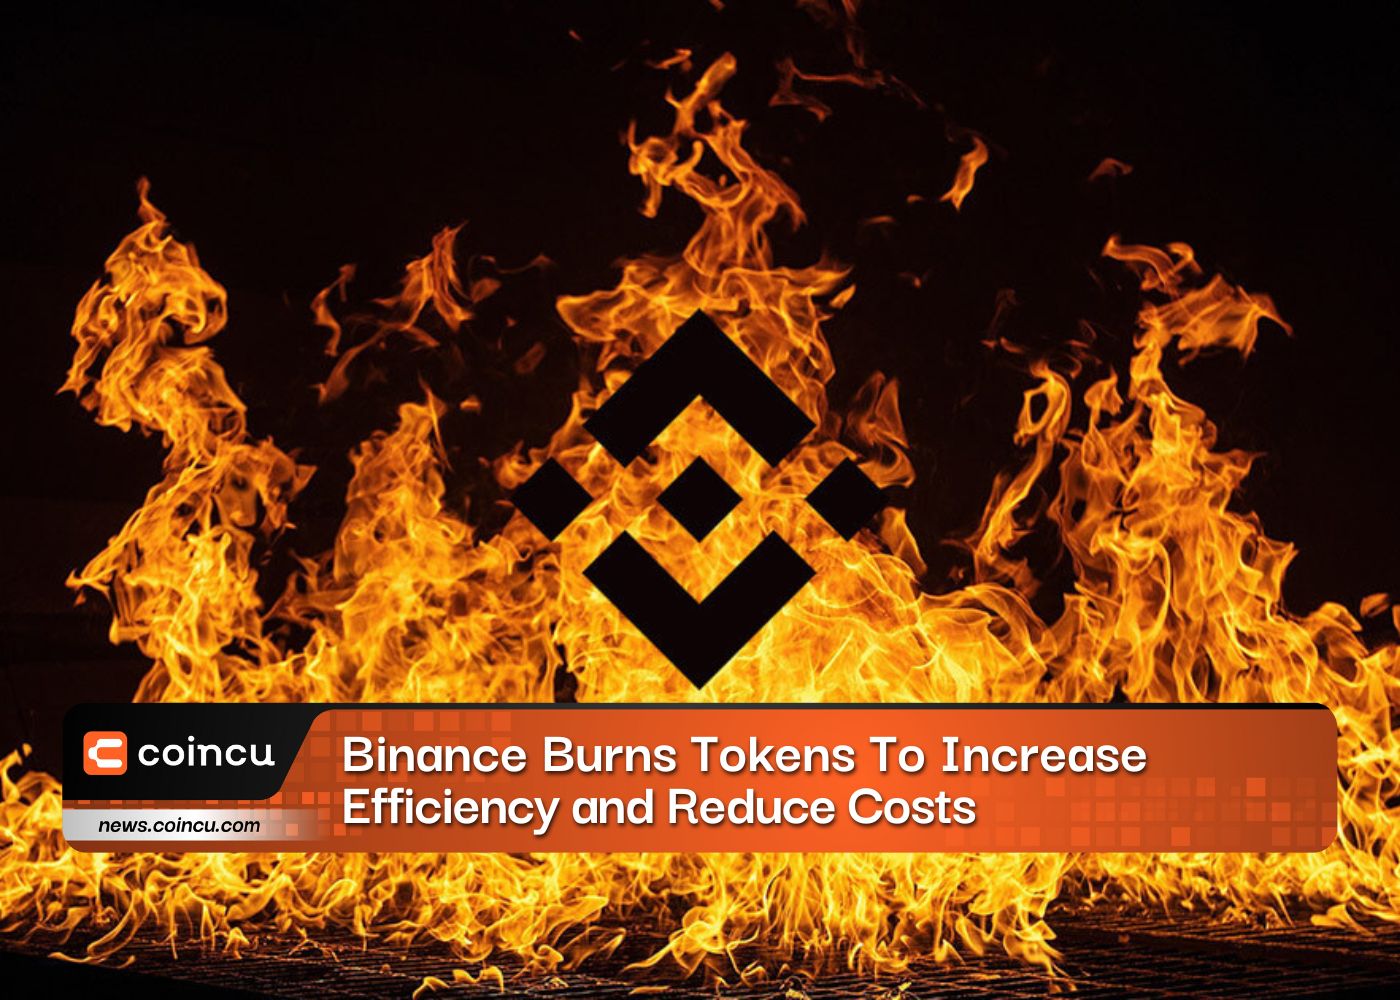 Binance Burns Tokens To Increase Efficiency and Reduce Costs